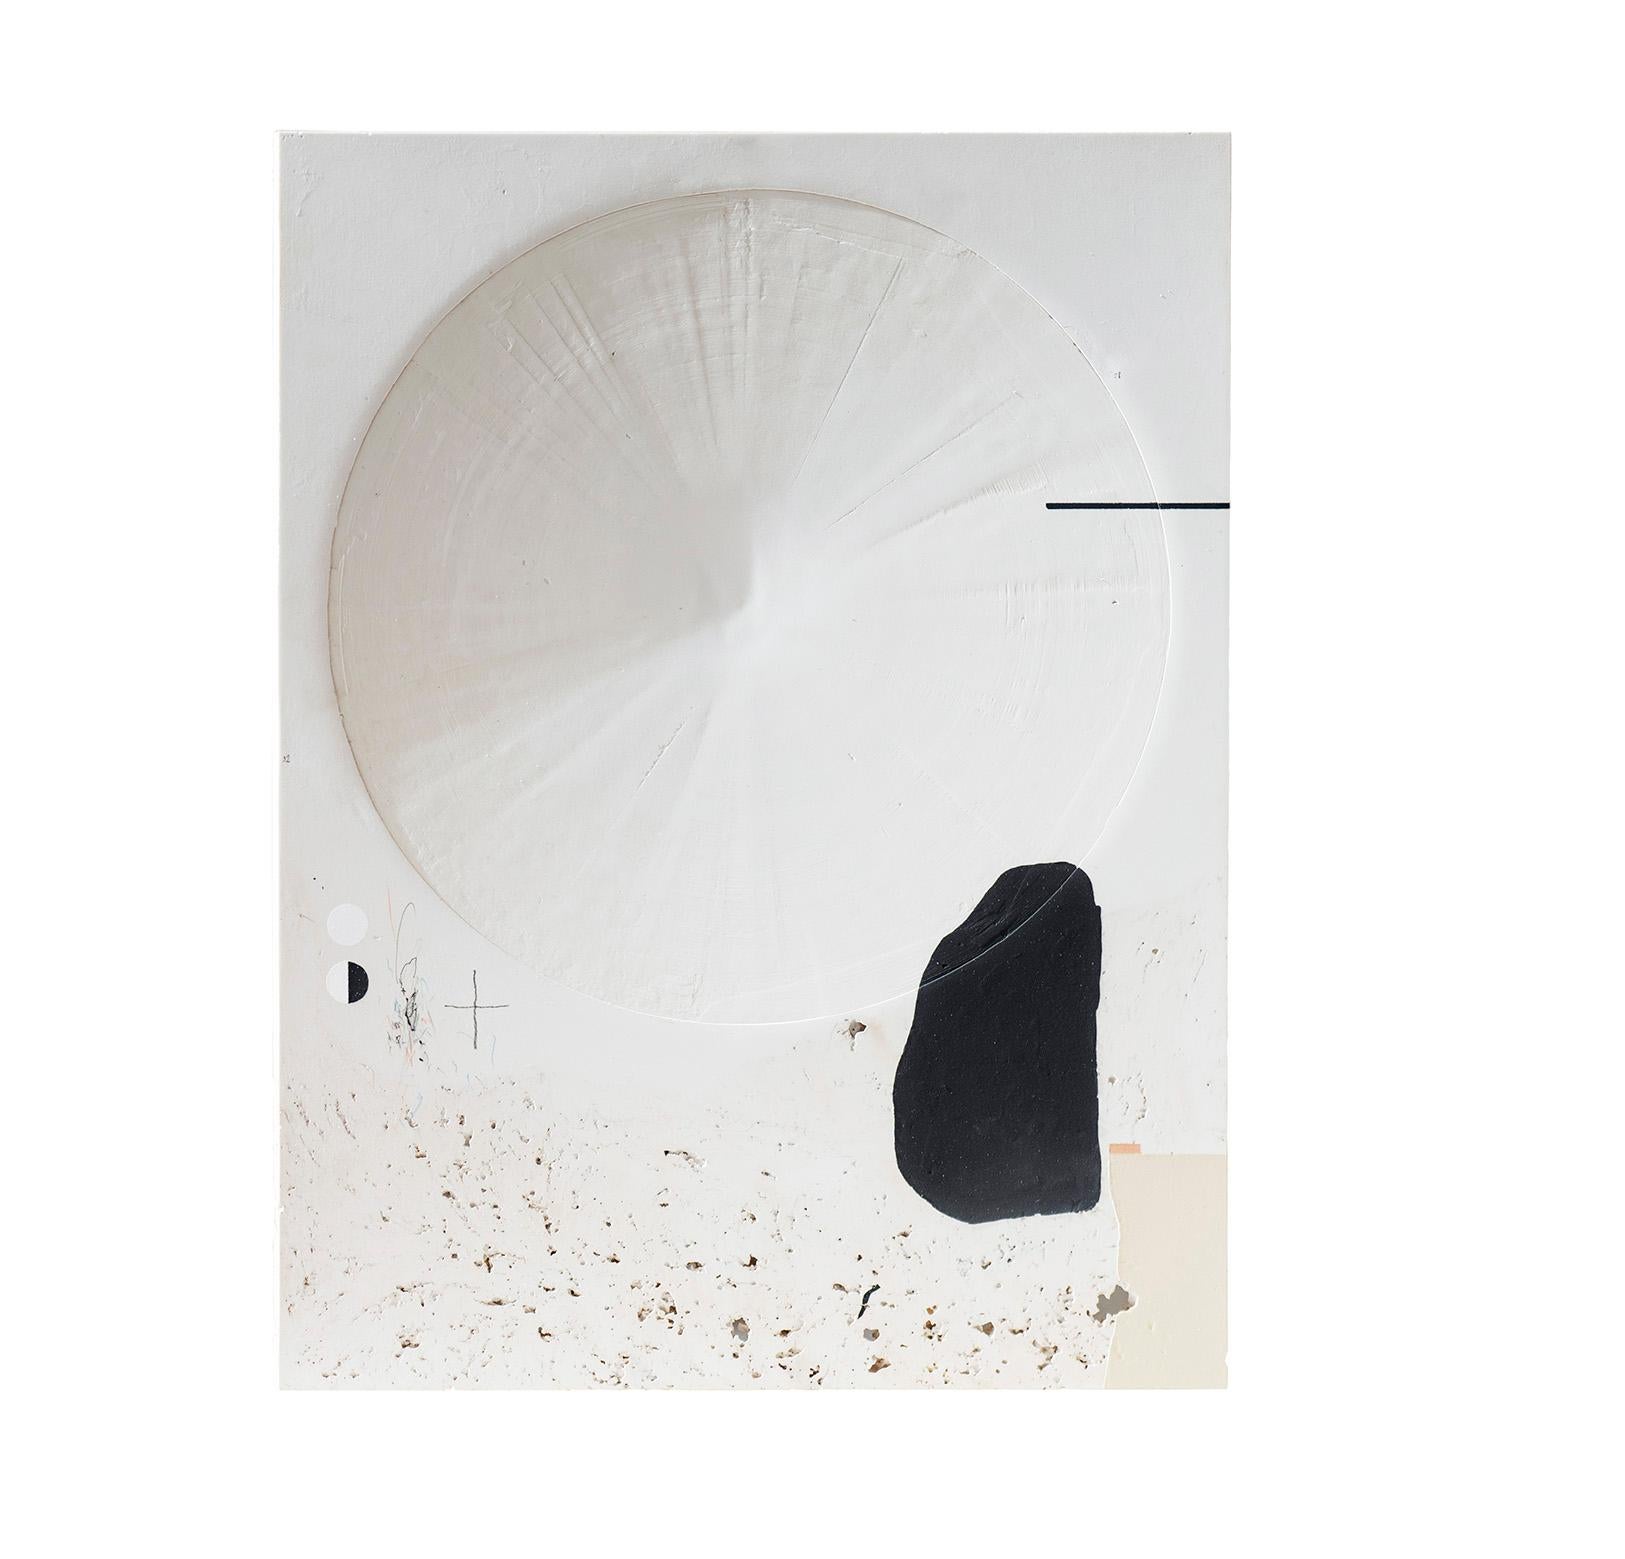 Lithic foil III object by Turbina
Dimensions: D 60 x W 80 x H 1 cm
Materials: Cast Stone, Mixed Media

Turbina is an art and design studio located in Barcelona and focused on the creation of pieces, objects and machines that revolve around the